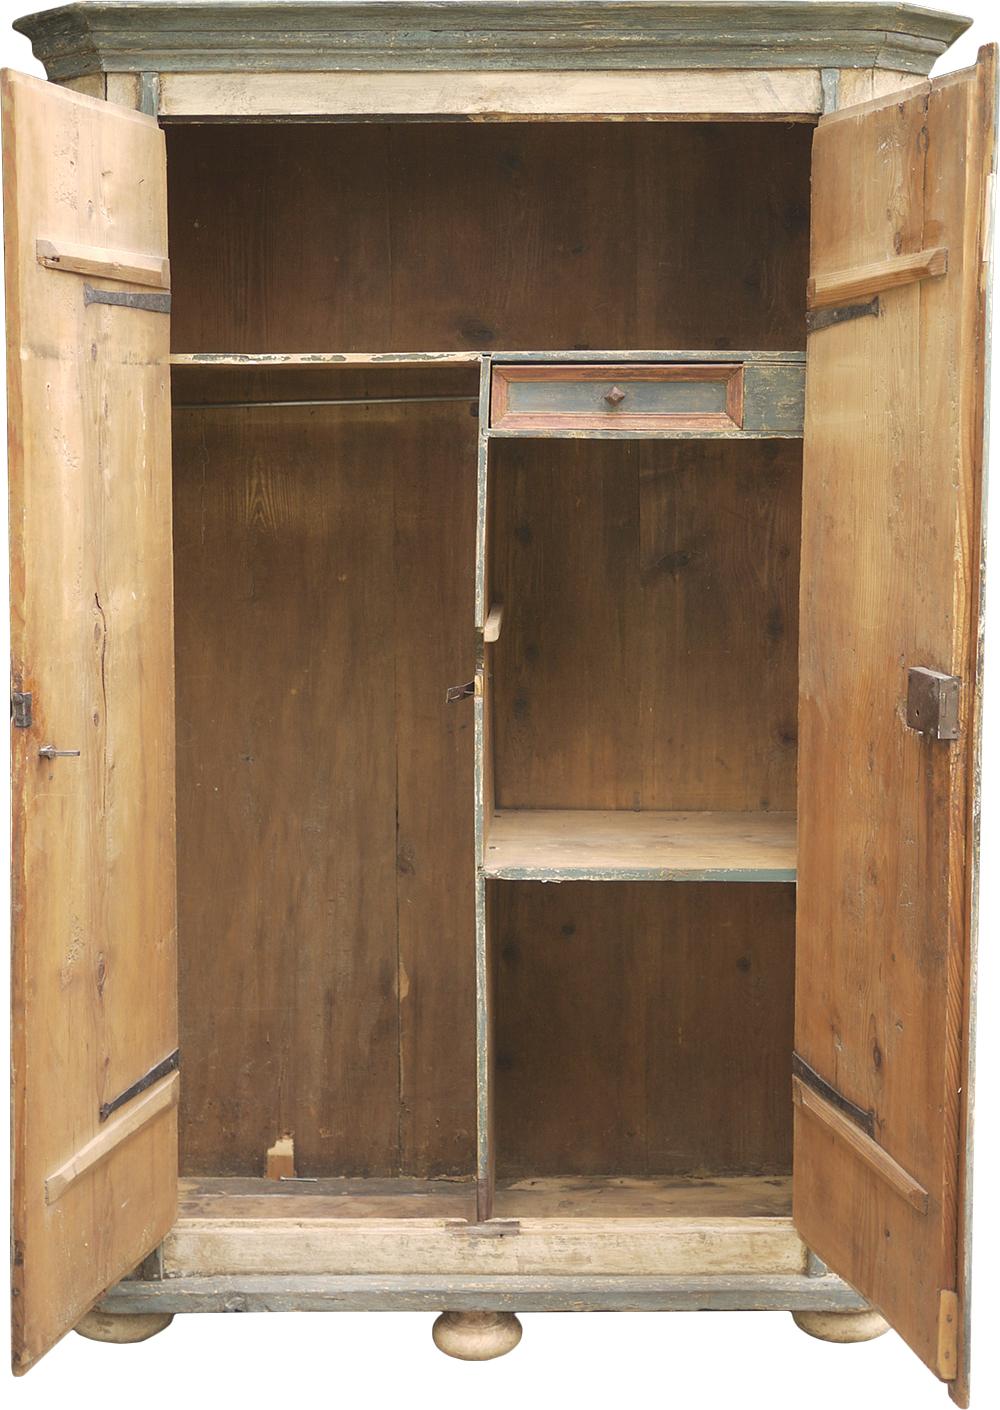 Tyrolean painted wardrobe
COD: A145
H. - 185 - W. - 117 (129 with frames) - P. - 43 (48 with frames)
H. - 72,8 in - W. - 46,1 in (50,8 in to the frames) - P. - 16,9 in (18,9 in to the frames)

Cabinet entirely painted in cream/ivory white. On the